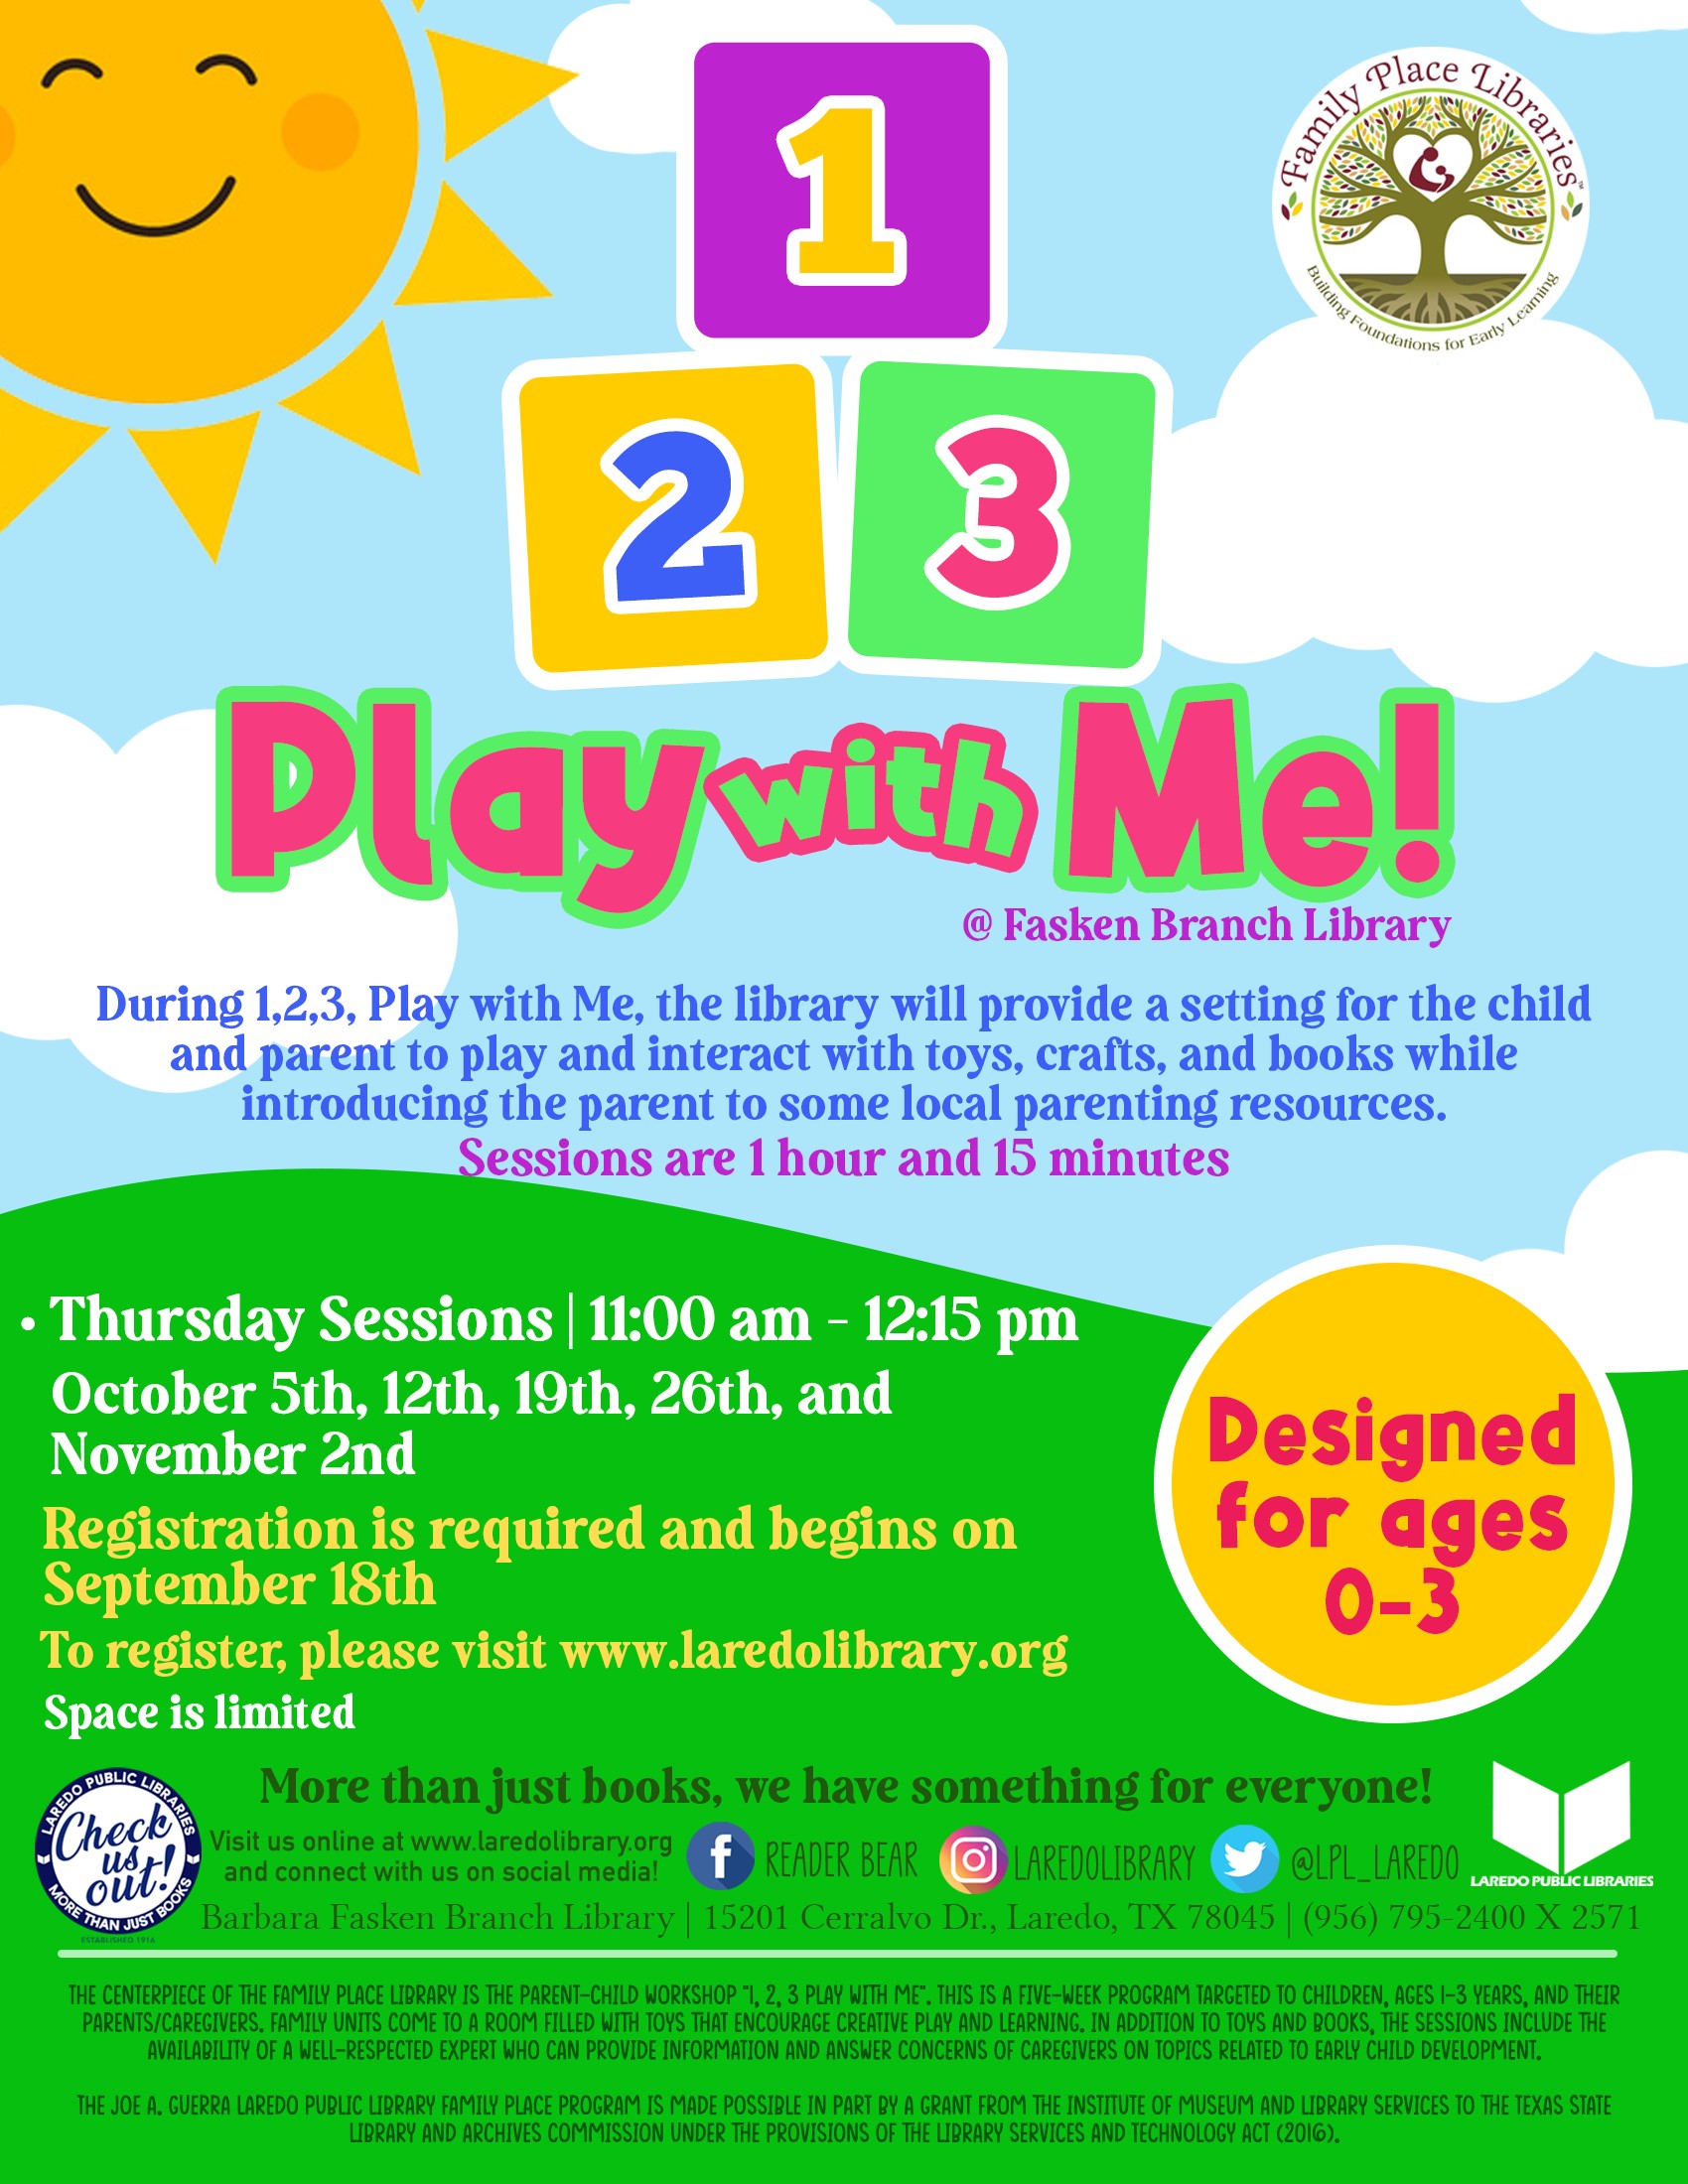 1, 2, 3 Play with Me Registration Begins